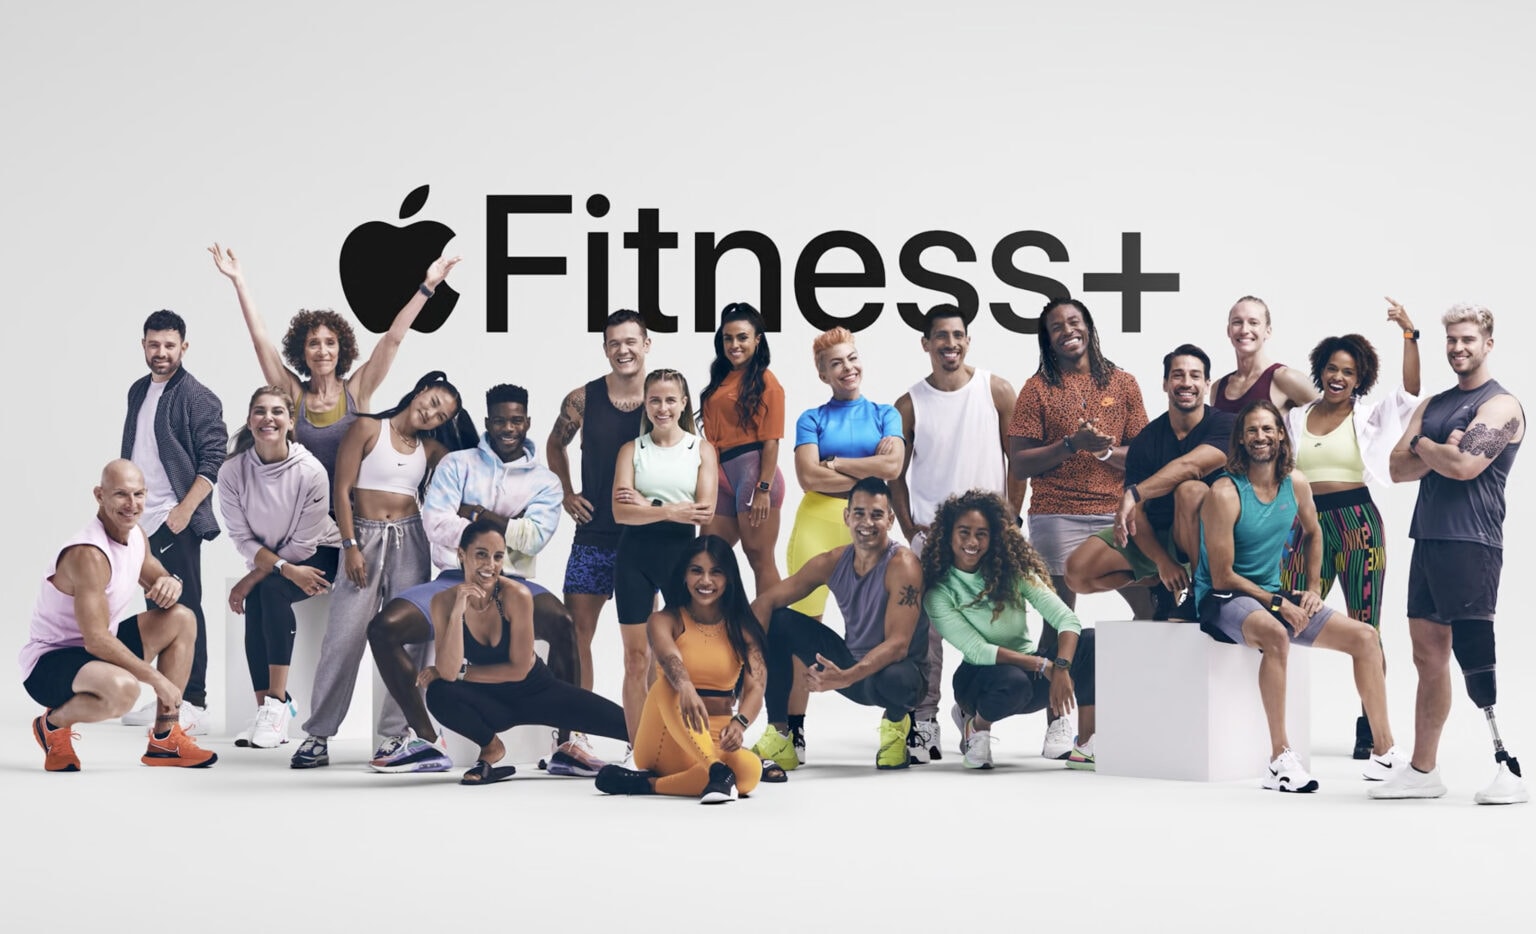 Can you keep up with Apple's new team of trainers?